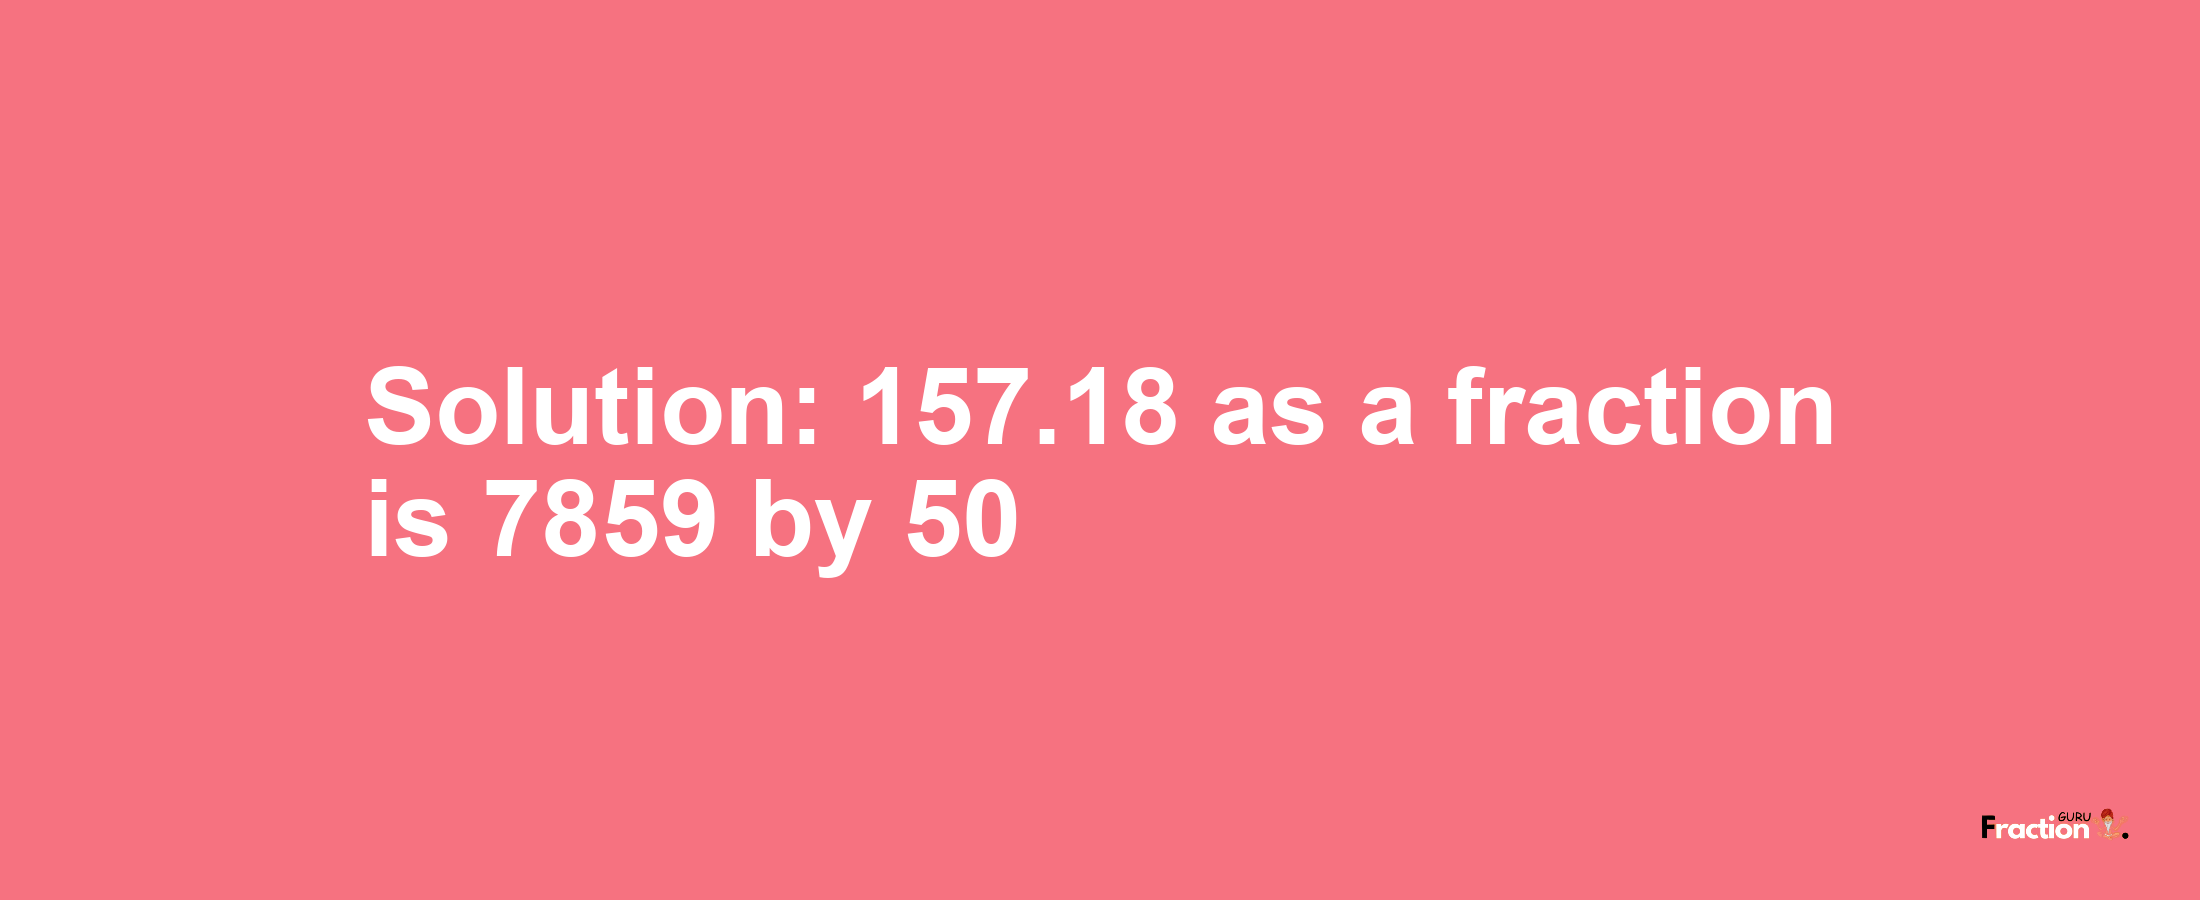 Solution:157.18 as a fraction is 7859/50